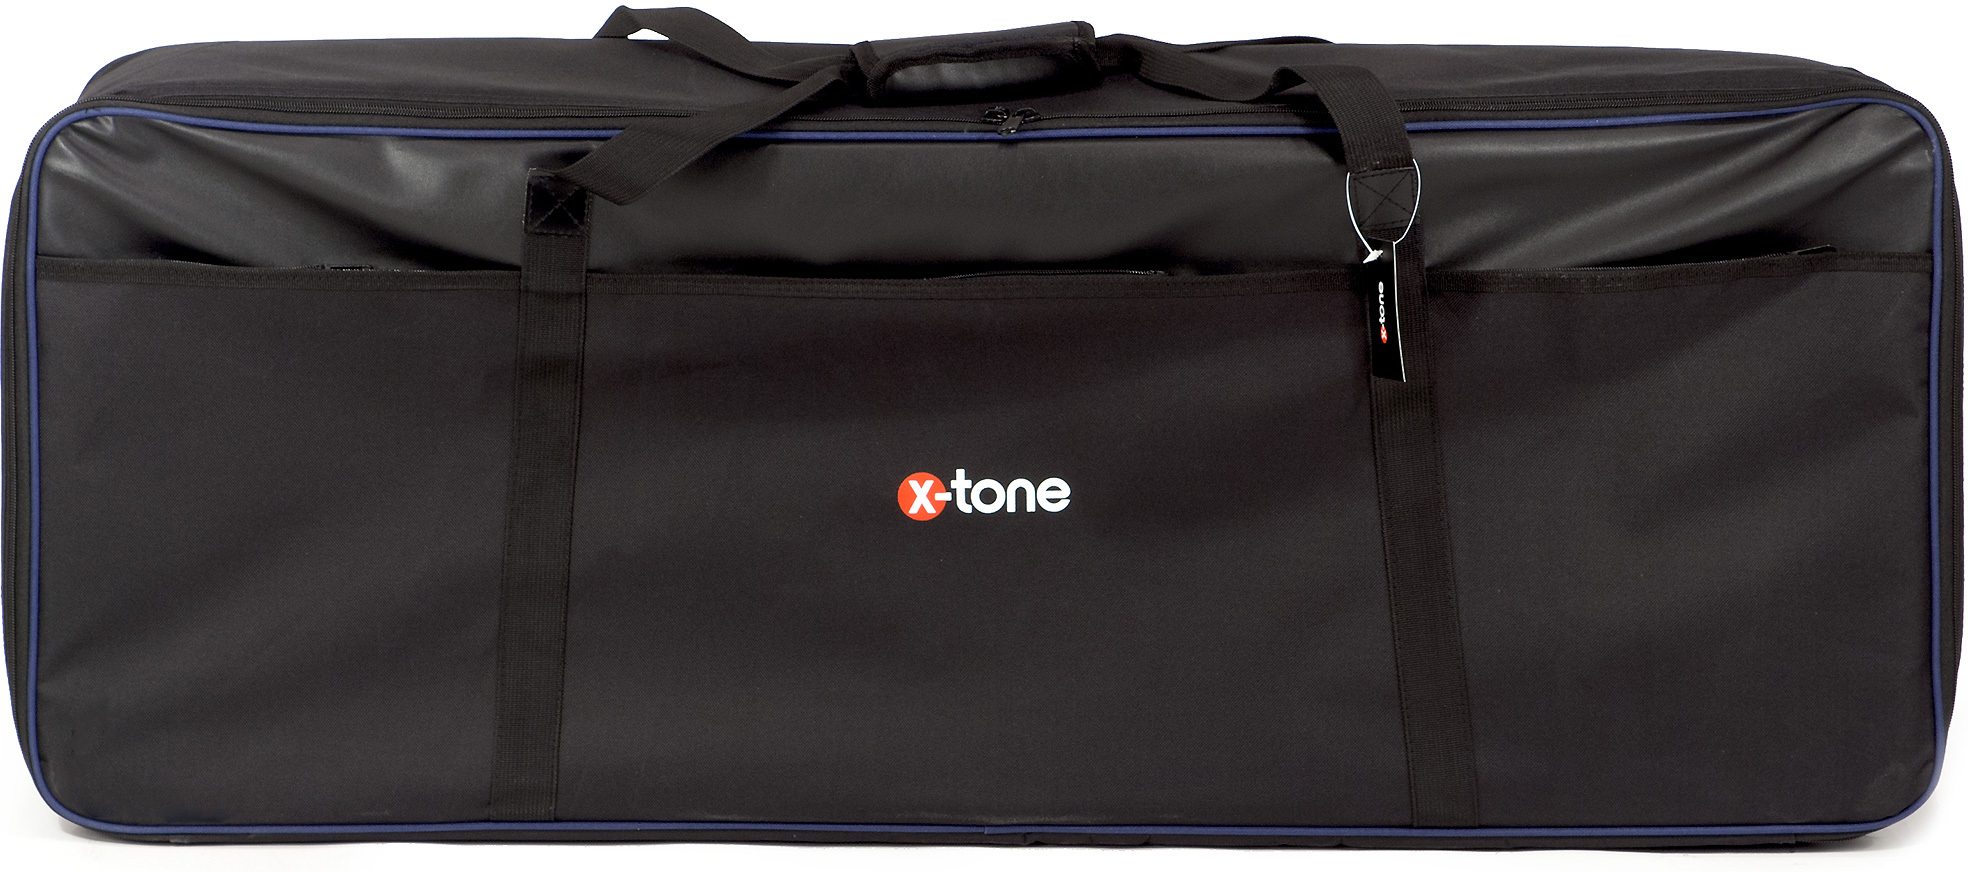 X-tone 2104 Pour Clavier 76 Notes En 25 Mm Black - Gigbag for Keyboard - Main picture